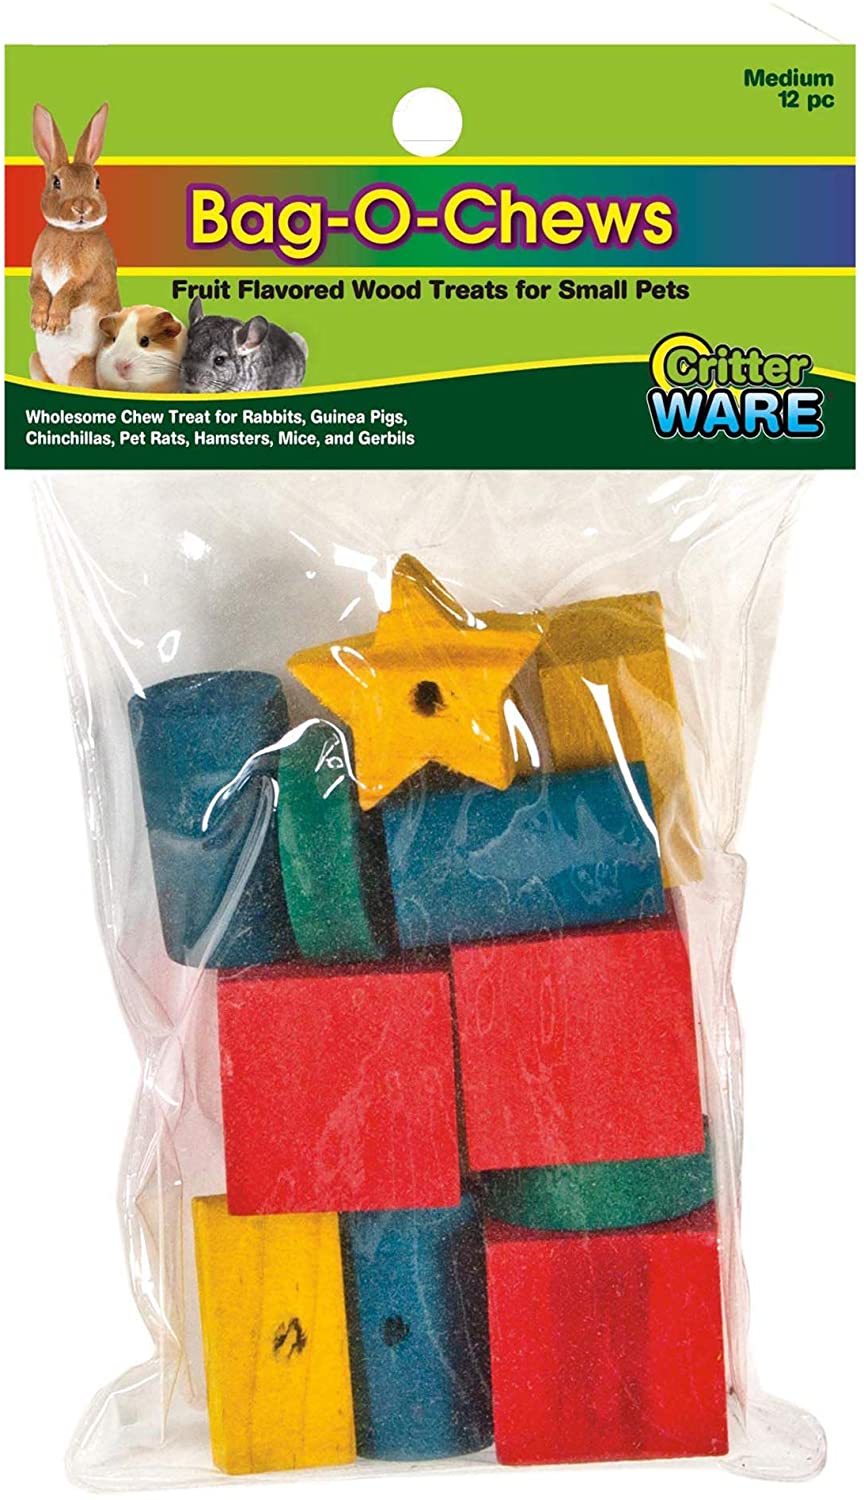 Ware Pet Products Bag-O-Chews